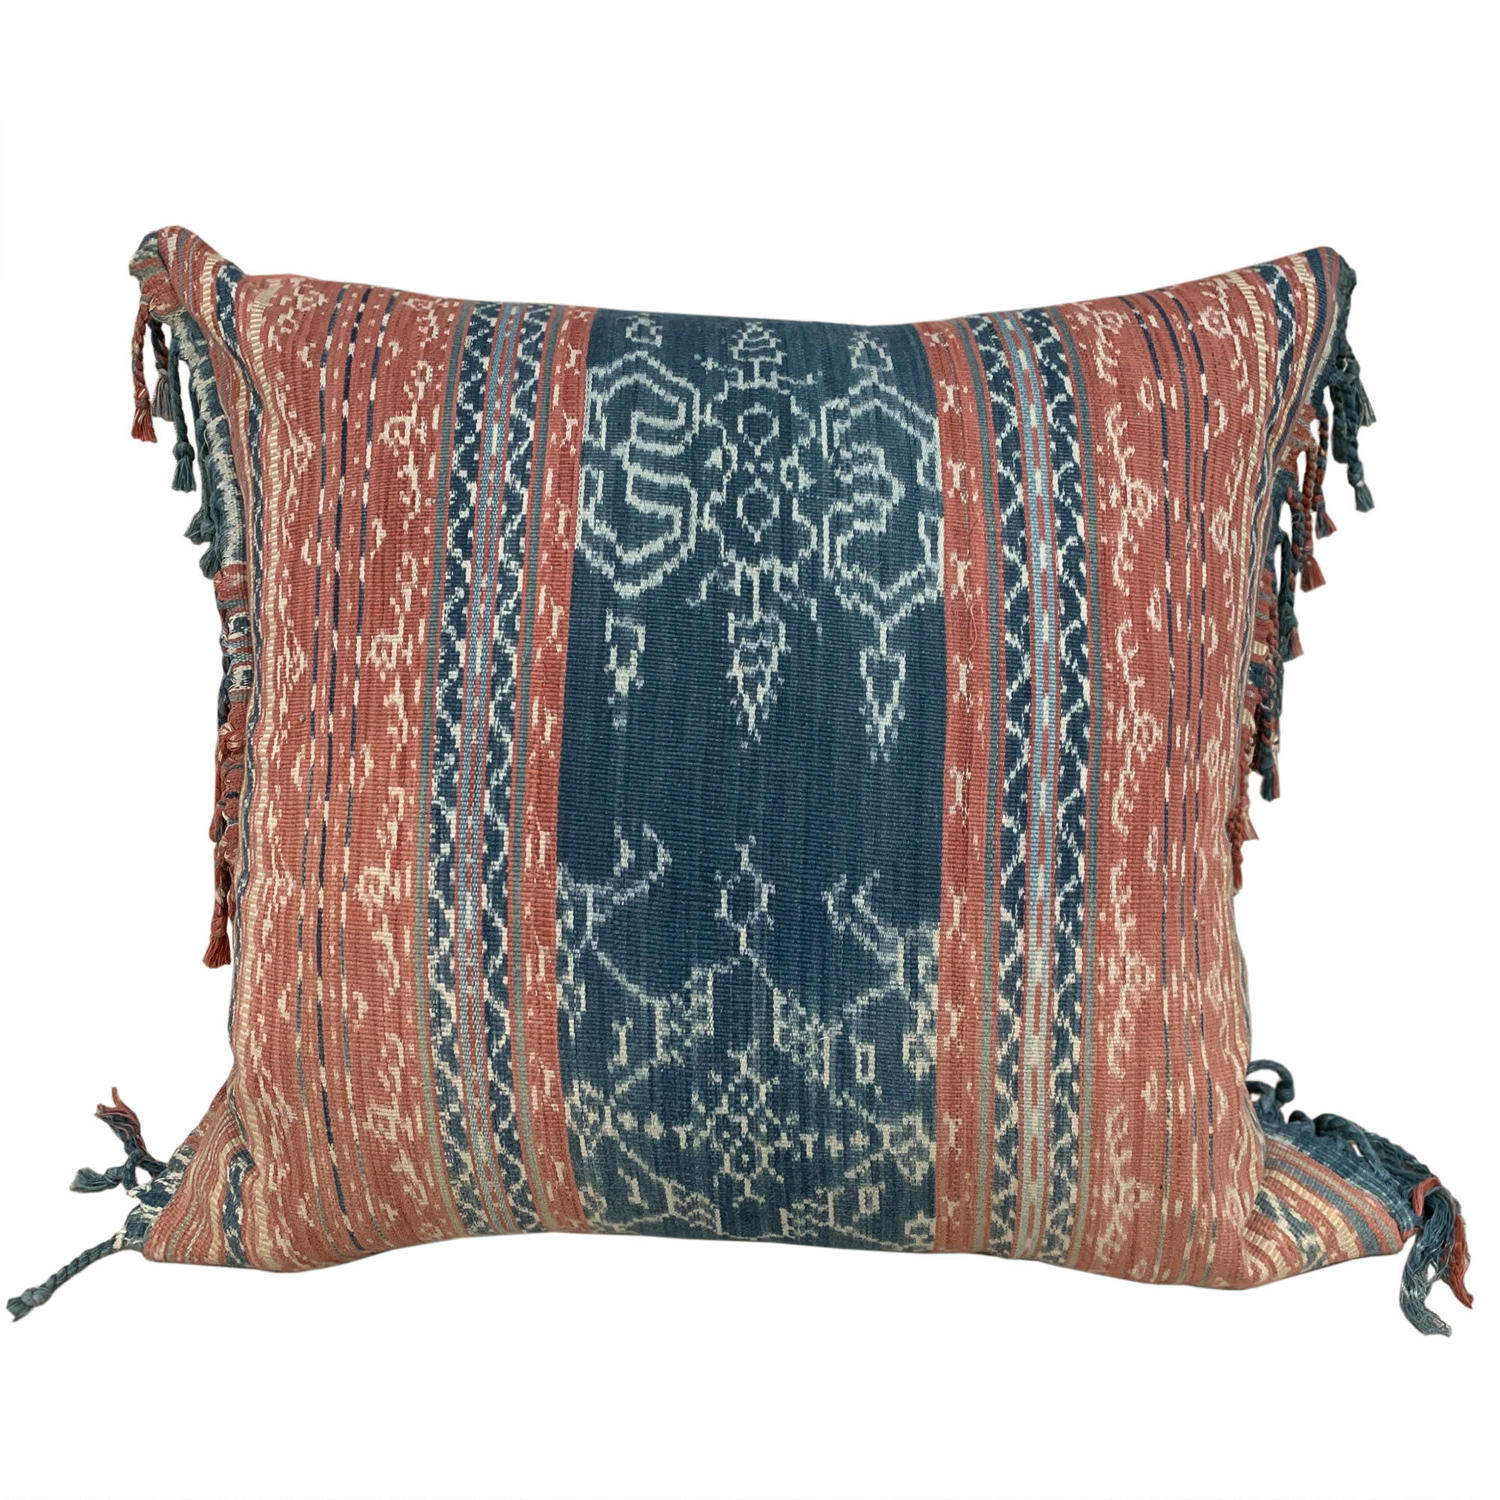 Flores ikat cushion with fringed sides